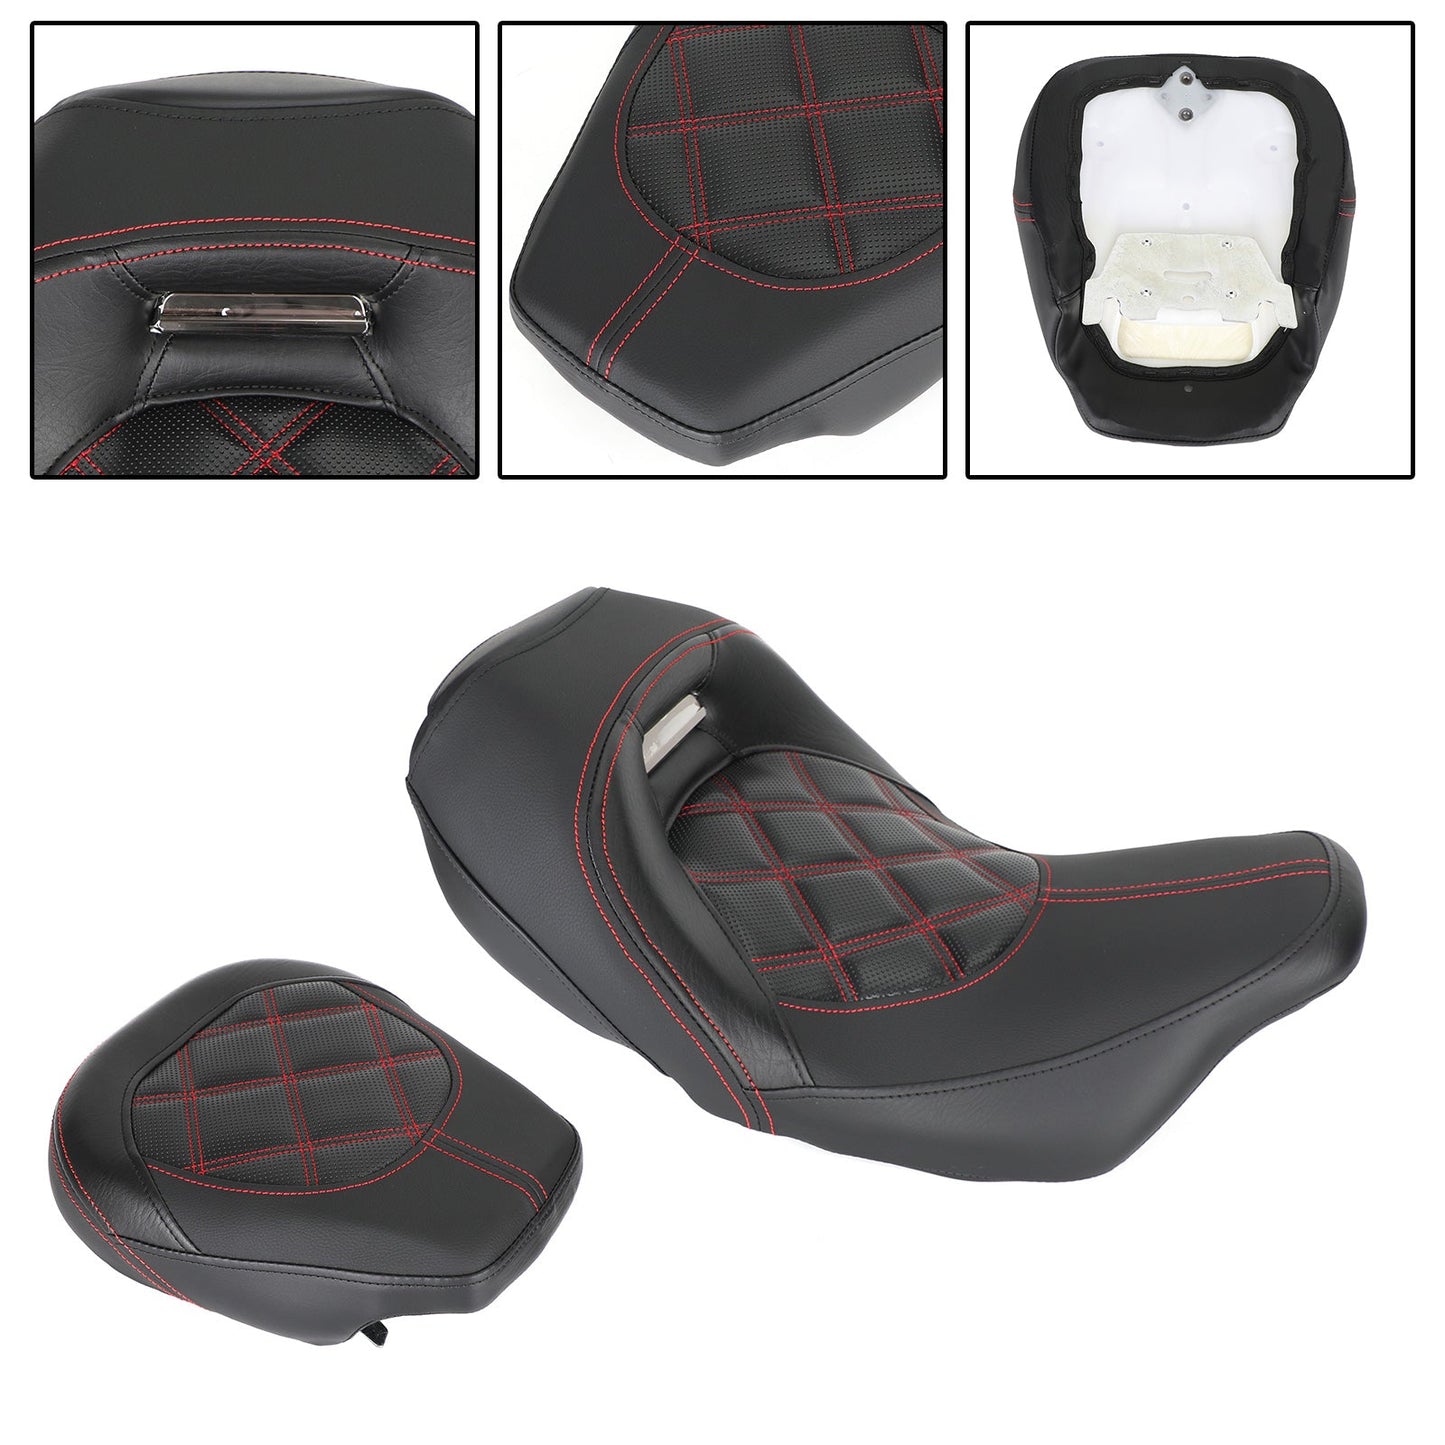 Driver Passenger Seat Red Fit For Harley Cvo Touring Road Glide Fltr 09-21 20